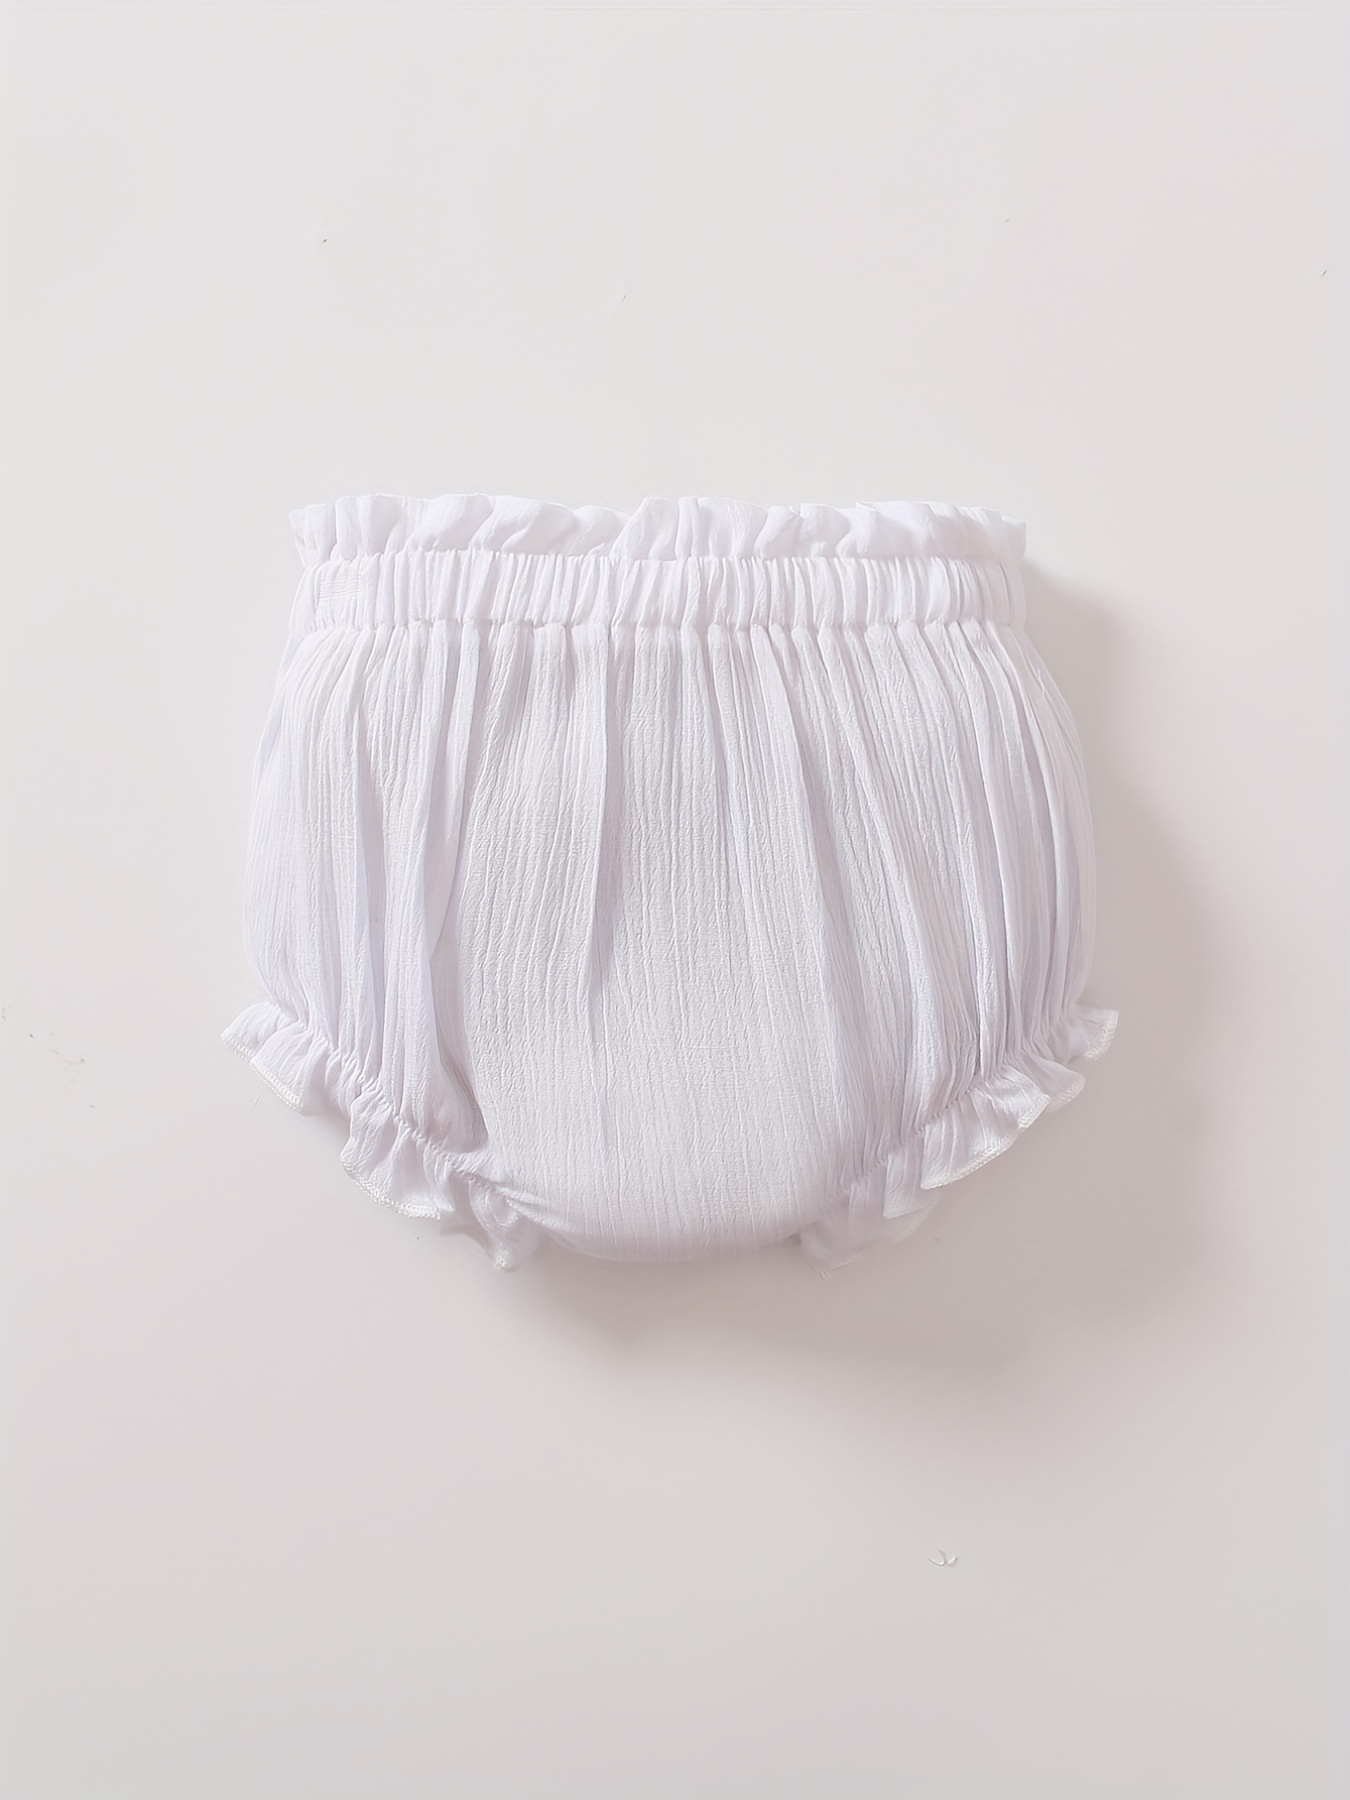 Baby Girls Shorts Lace Ruffle Cotton Bloomers Infant Diaper Cover